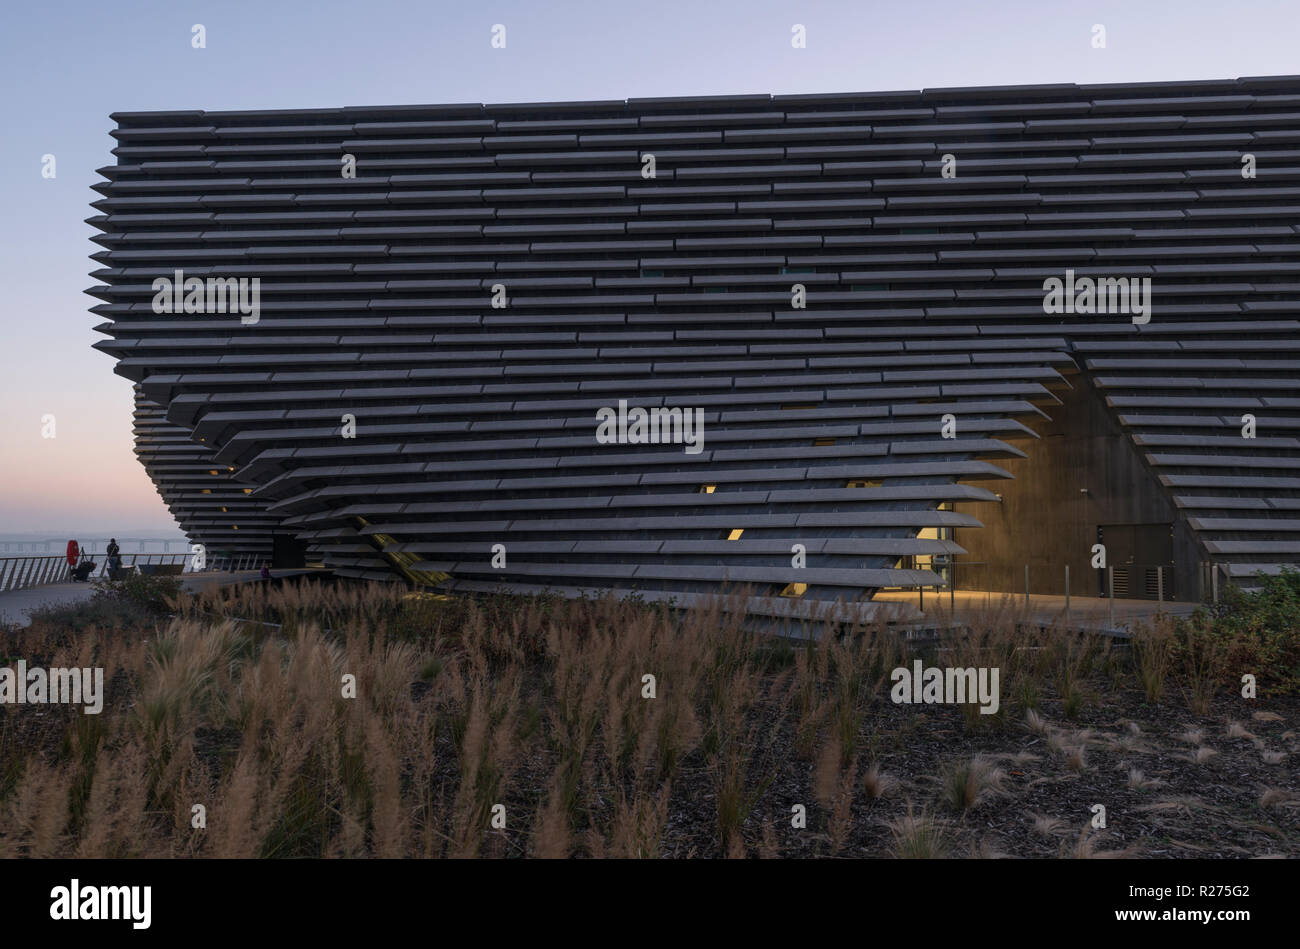 The new V&A design museum on Dundee's regenerated waterfront has already passed the 100,000 visitor mark within 2months of opening, Dundee Scotland UK Stock Photo